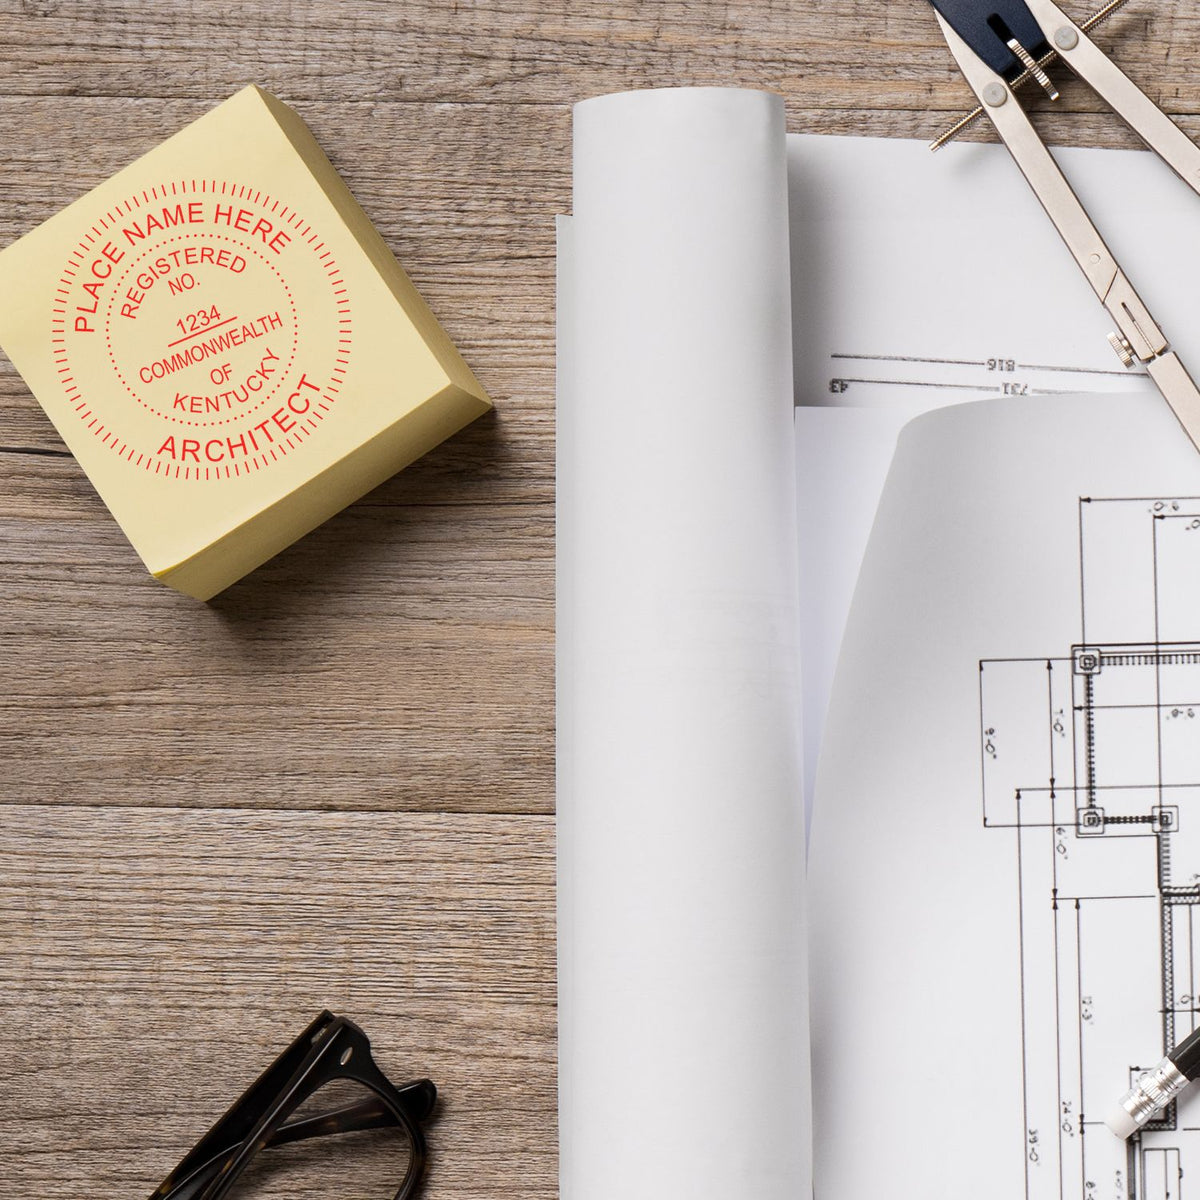 The Slim Pre-Inked Kentucky Architect Seal Stamp stamp impression comes to life with a crisp, detailed photo on paper - showcasing true professional quality.